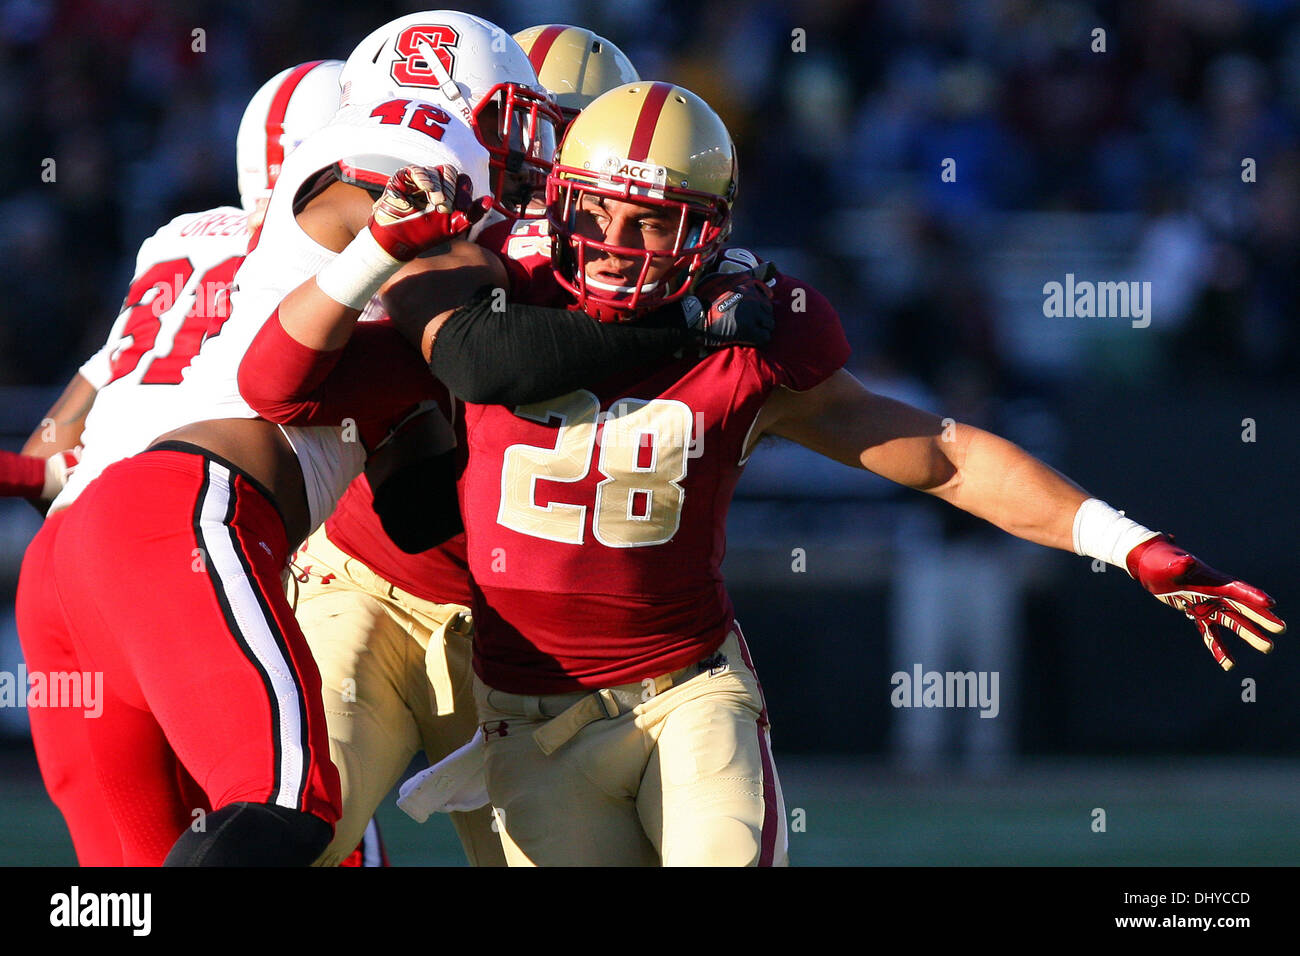 Chestnut Hill, Massachusetts, USA. 16th Nov, 2013. November 16, 2013: North Carolina State Wolfpack linebacker M.J. Salahuddin (42) and Boston College Eagles safety Matt Milano (28) in action during the NCAA football game between the Boston College Eagles and North Carolina State Wolfpack at Alumni Stadium. Boston College defeated North Carolina State 38-21 and becomes bowl eligible. Anthony Nesmith/CSM/Alamy Live News Stock Photo